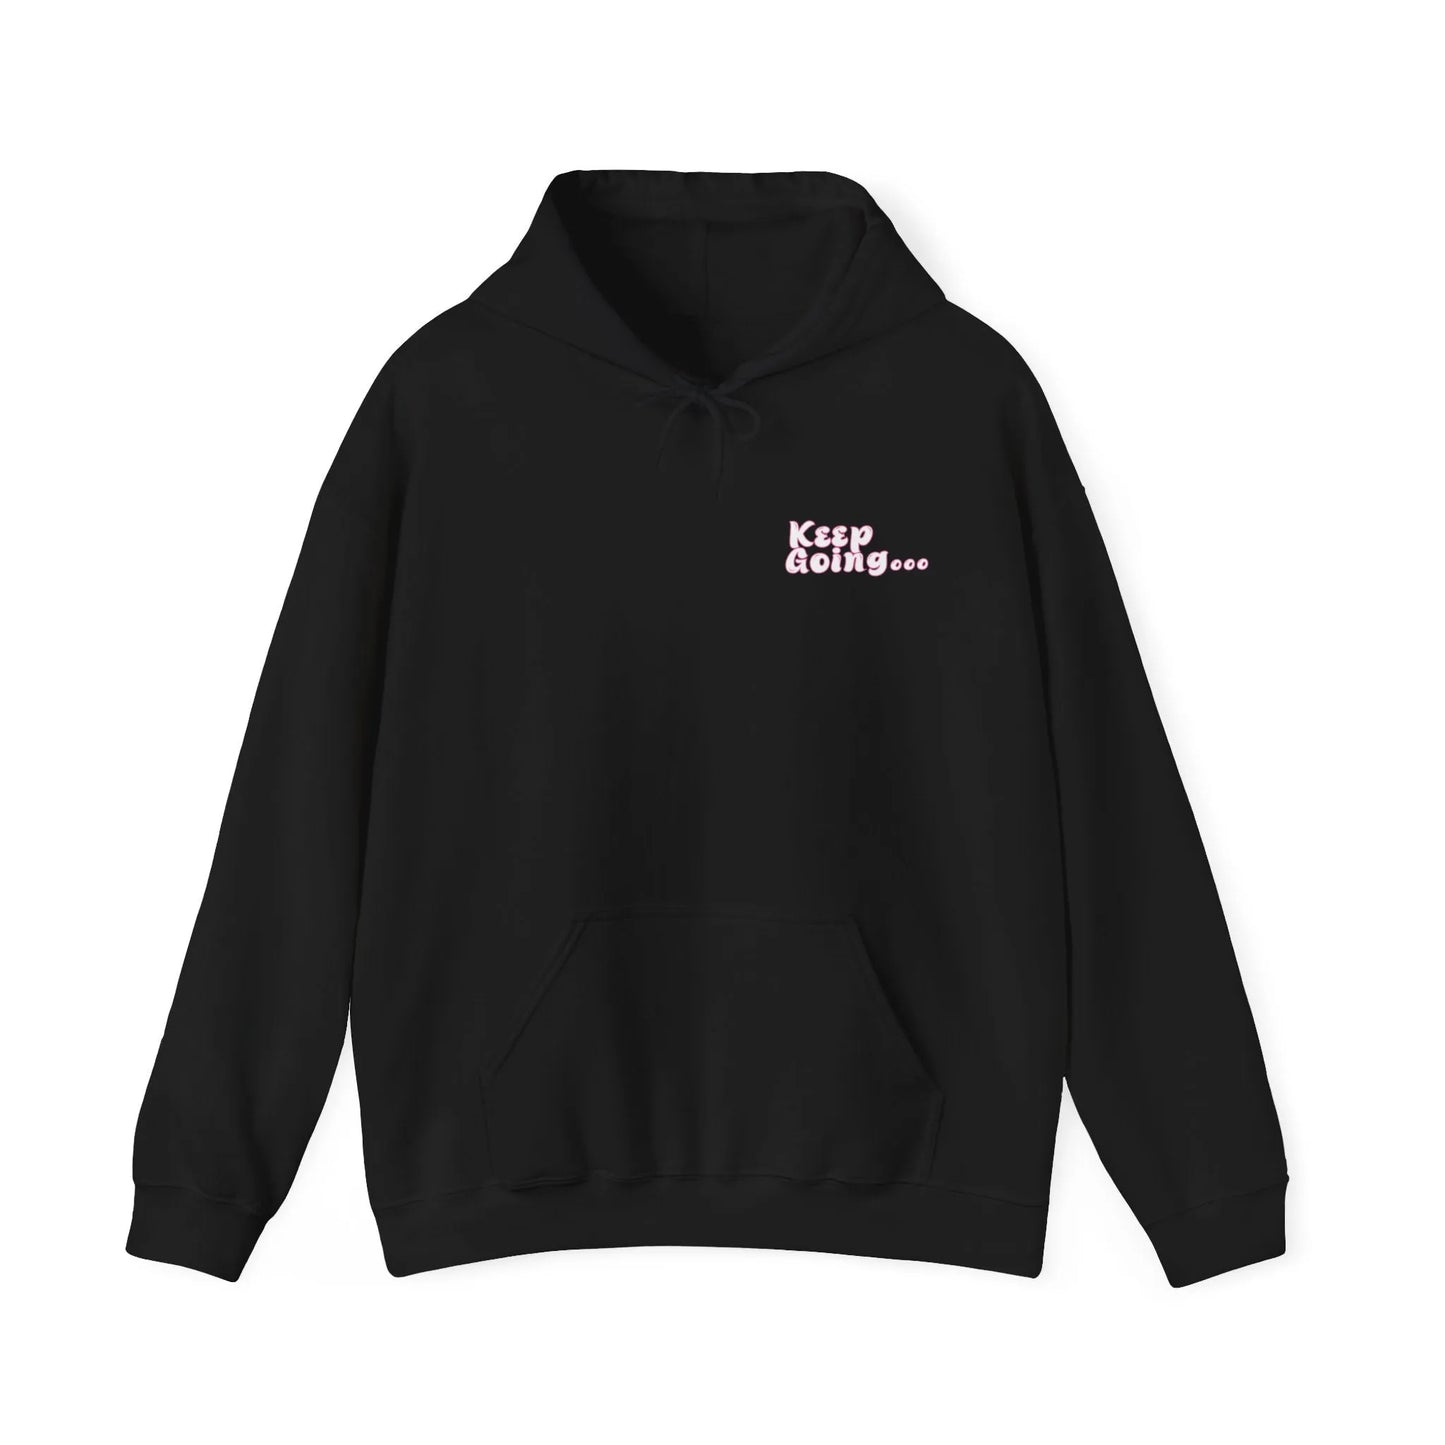 It's A Good Day To Keep Going Hoodie Pink Black Front